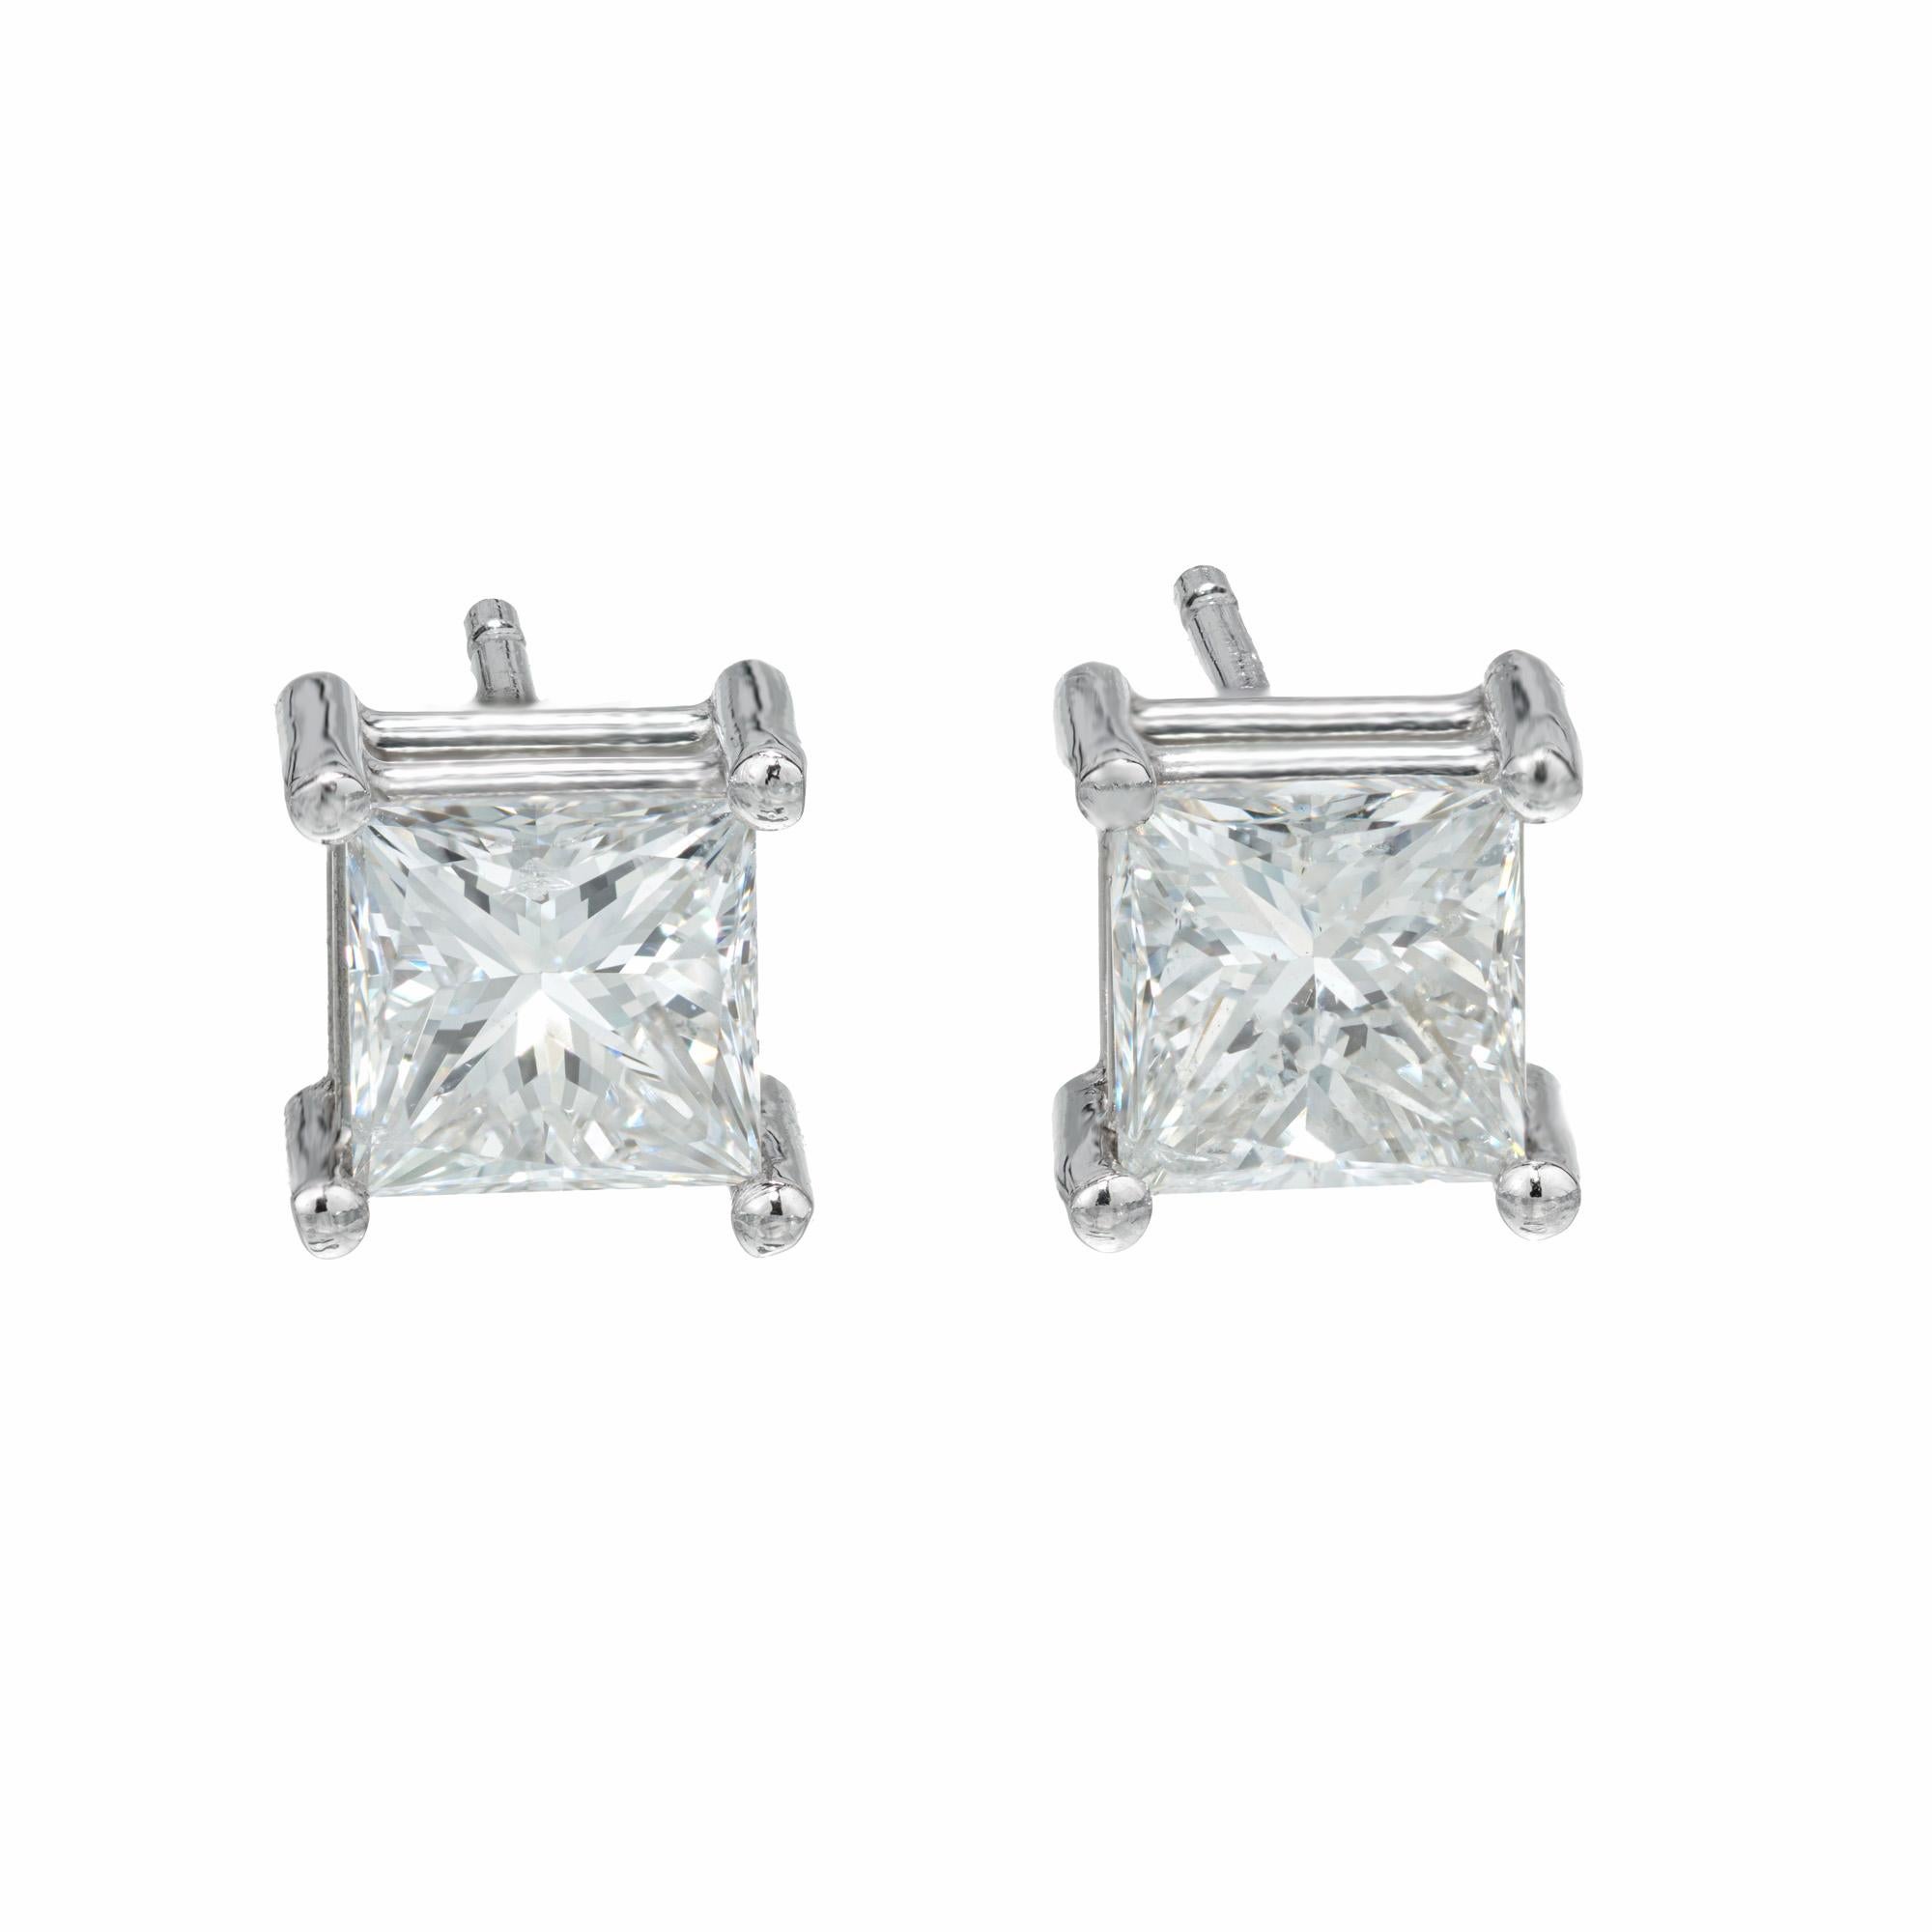 Bright, white and colorless princess cut diamond stud earrings. 2 EGL certified, E-F colorless square cut diamonds set in simple 4 prong platinum basket settings. Designed and crafted in the Peter Suchy Workshop.

2 square modified brilliant cut